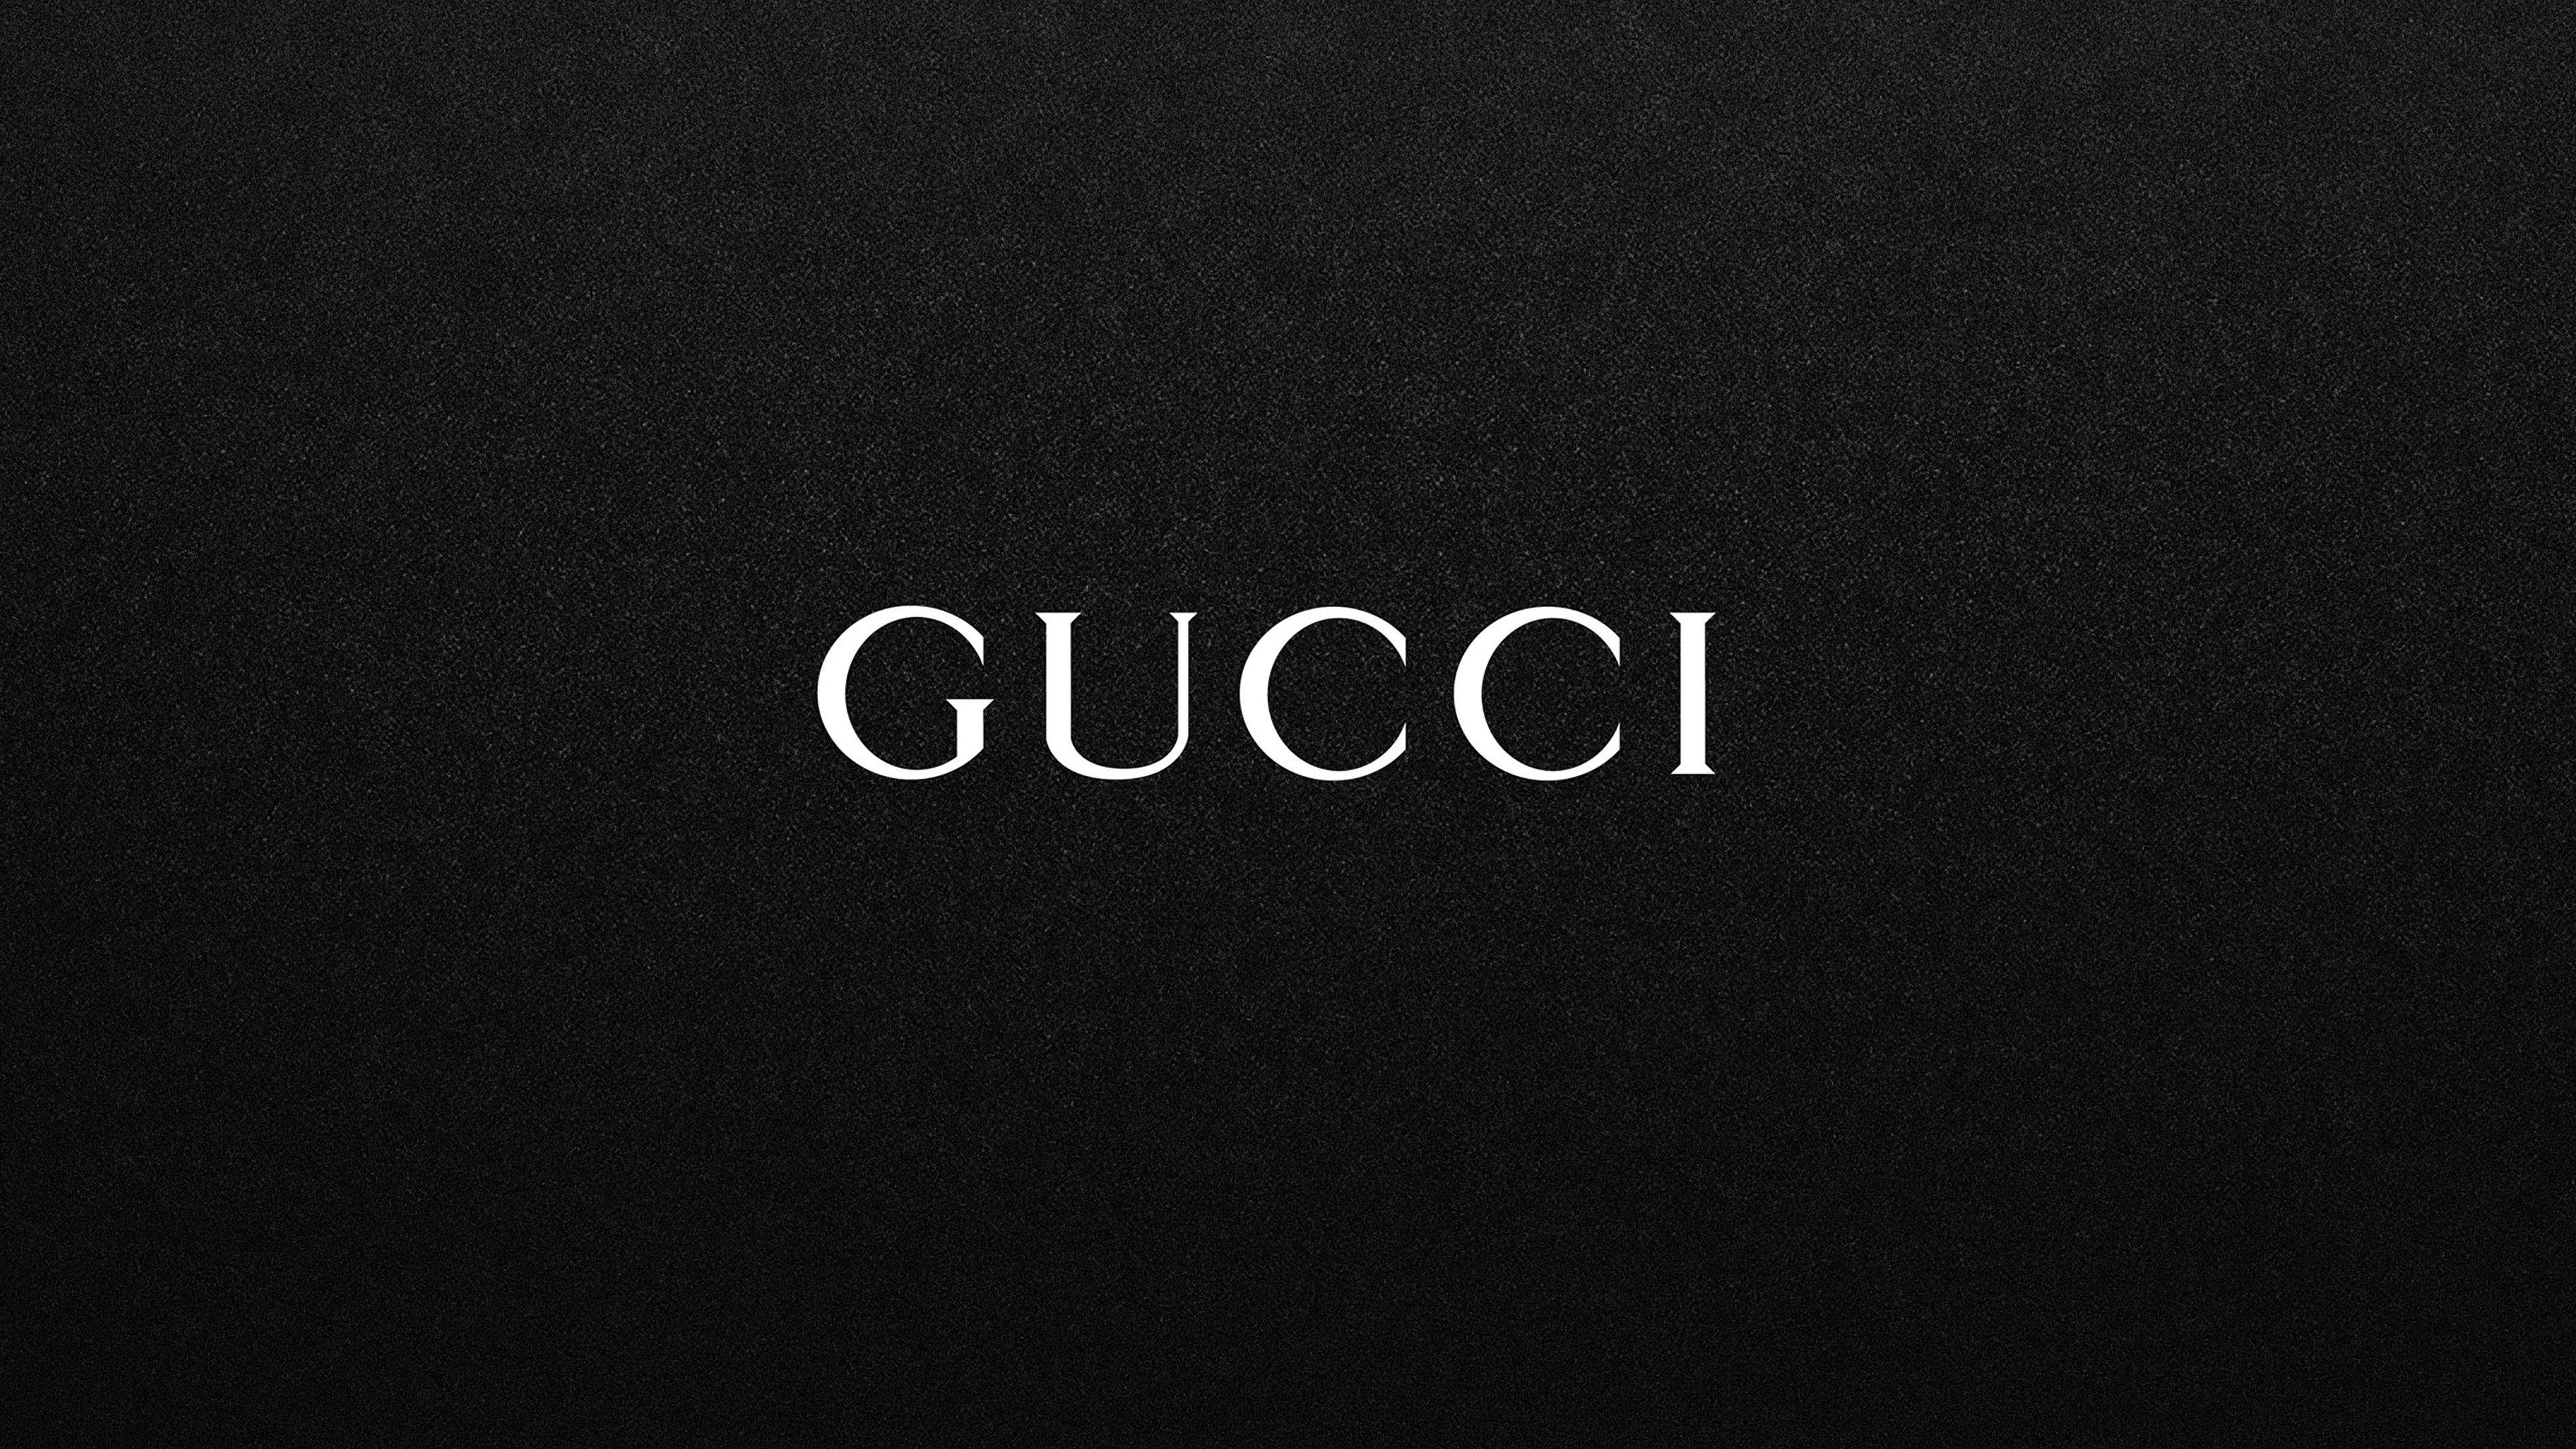 Rose Gold Gucci Wallpapers - Top Free Rose Gold Gucci Backgrounds ...